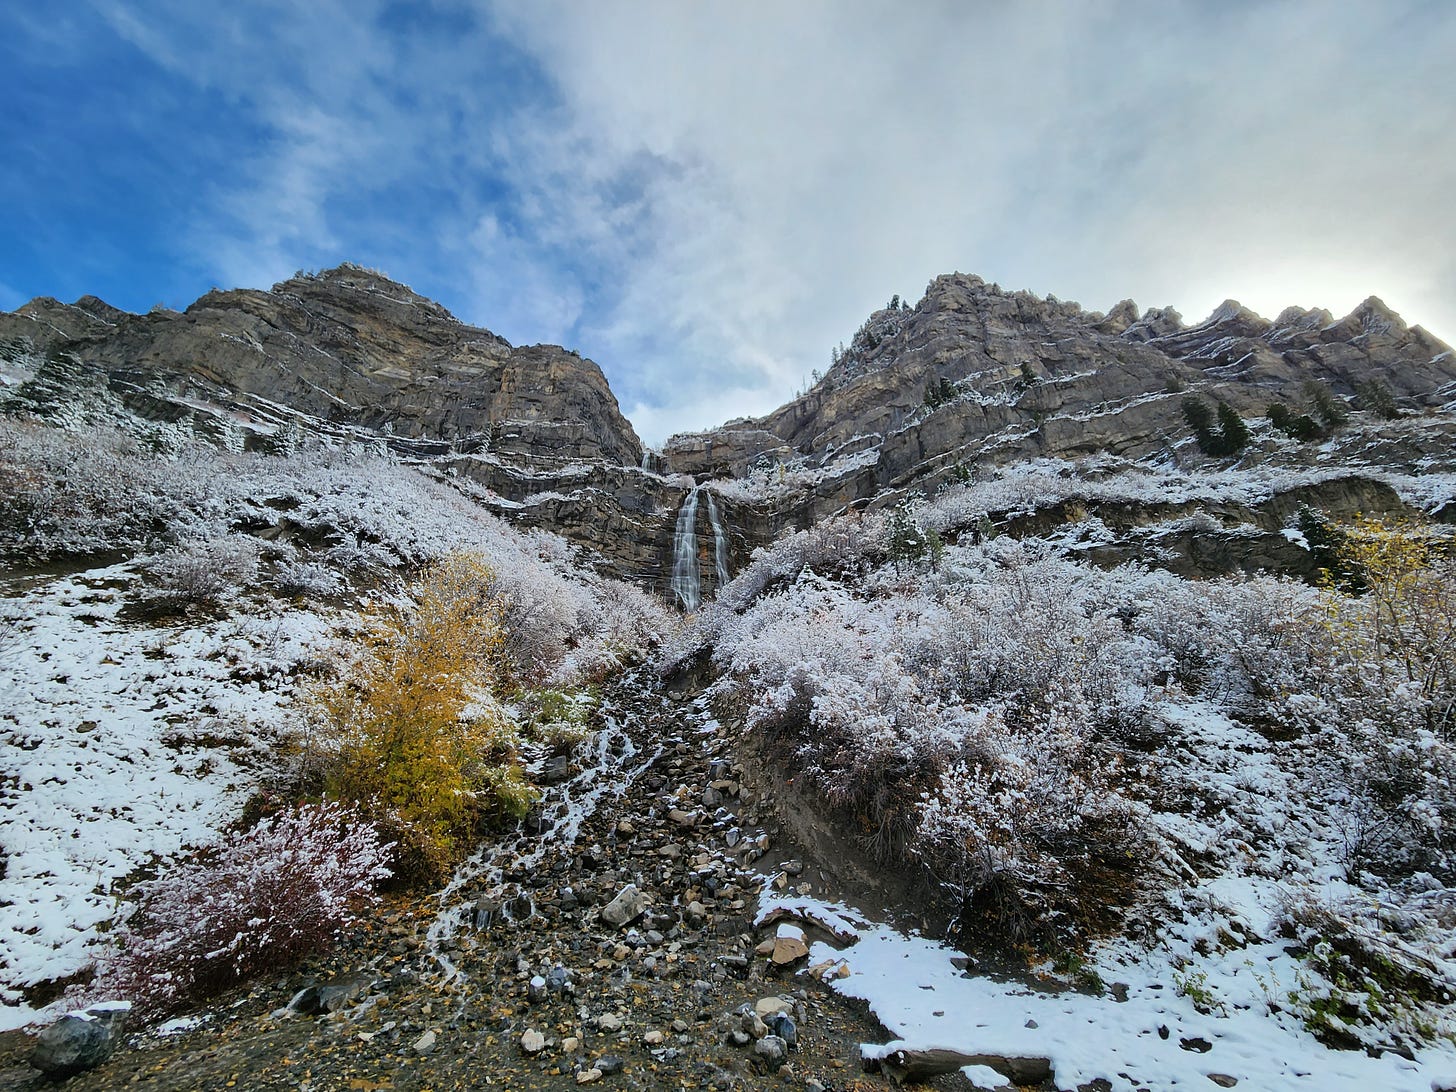 thin waterfall amid mountains with light snow on rocks, ground, and brush